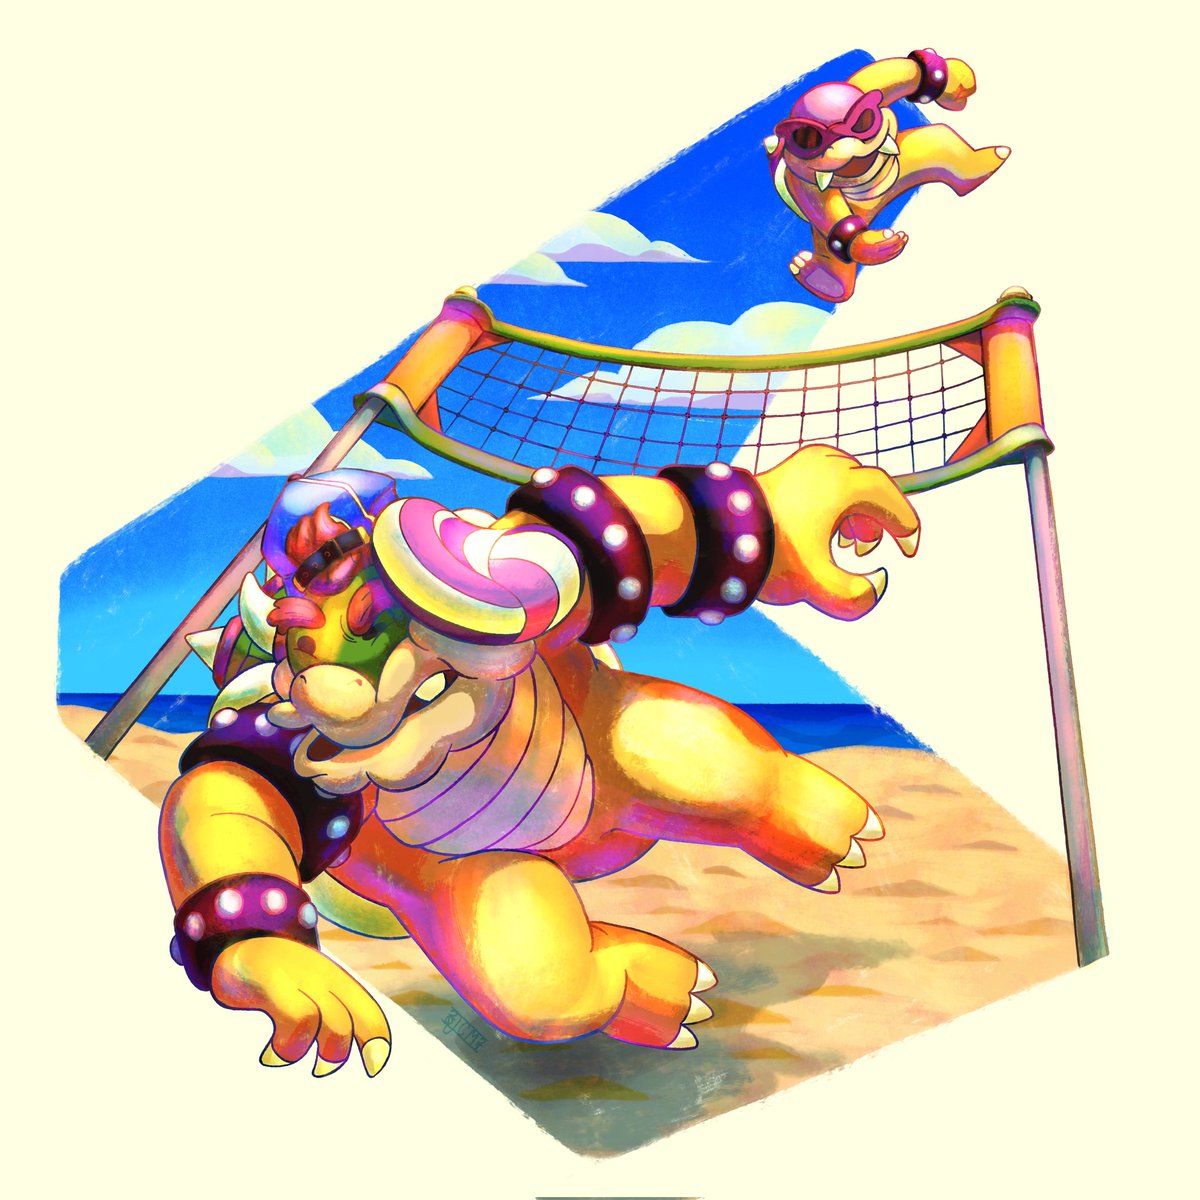 According to Roy, there's one move and ONLY one move in beach volleyball 
#summerofbowser #supermario #supermariobros #bowser #volleyball #beachvolleyball #roykoopa #dad #summer #summervibes